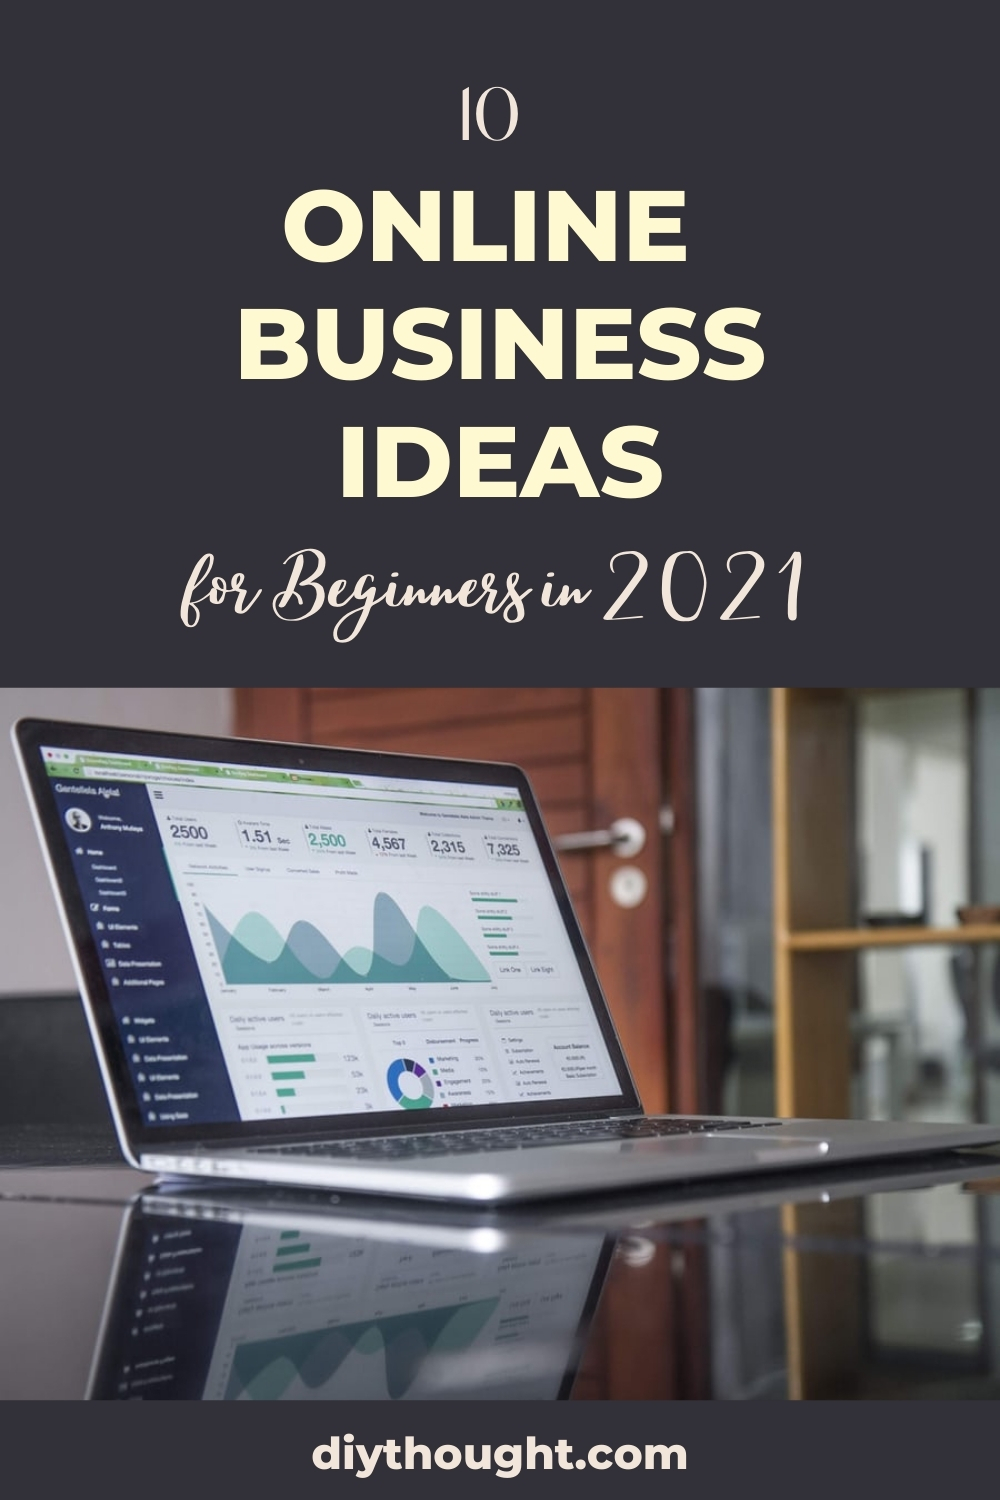 10 Online Business Ideas for Beginners in 2021 - diy Thought